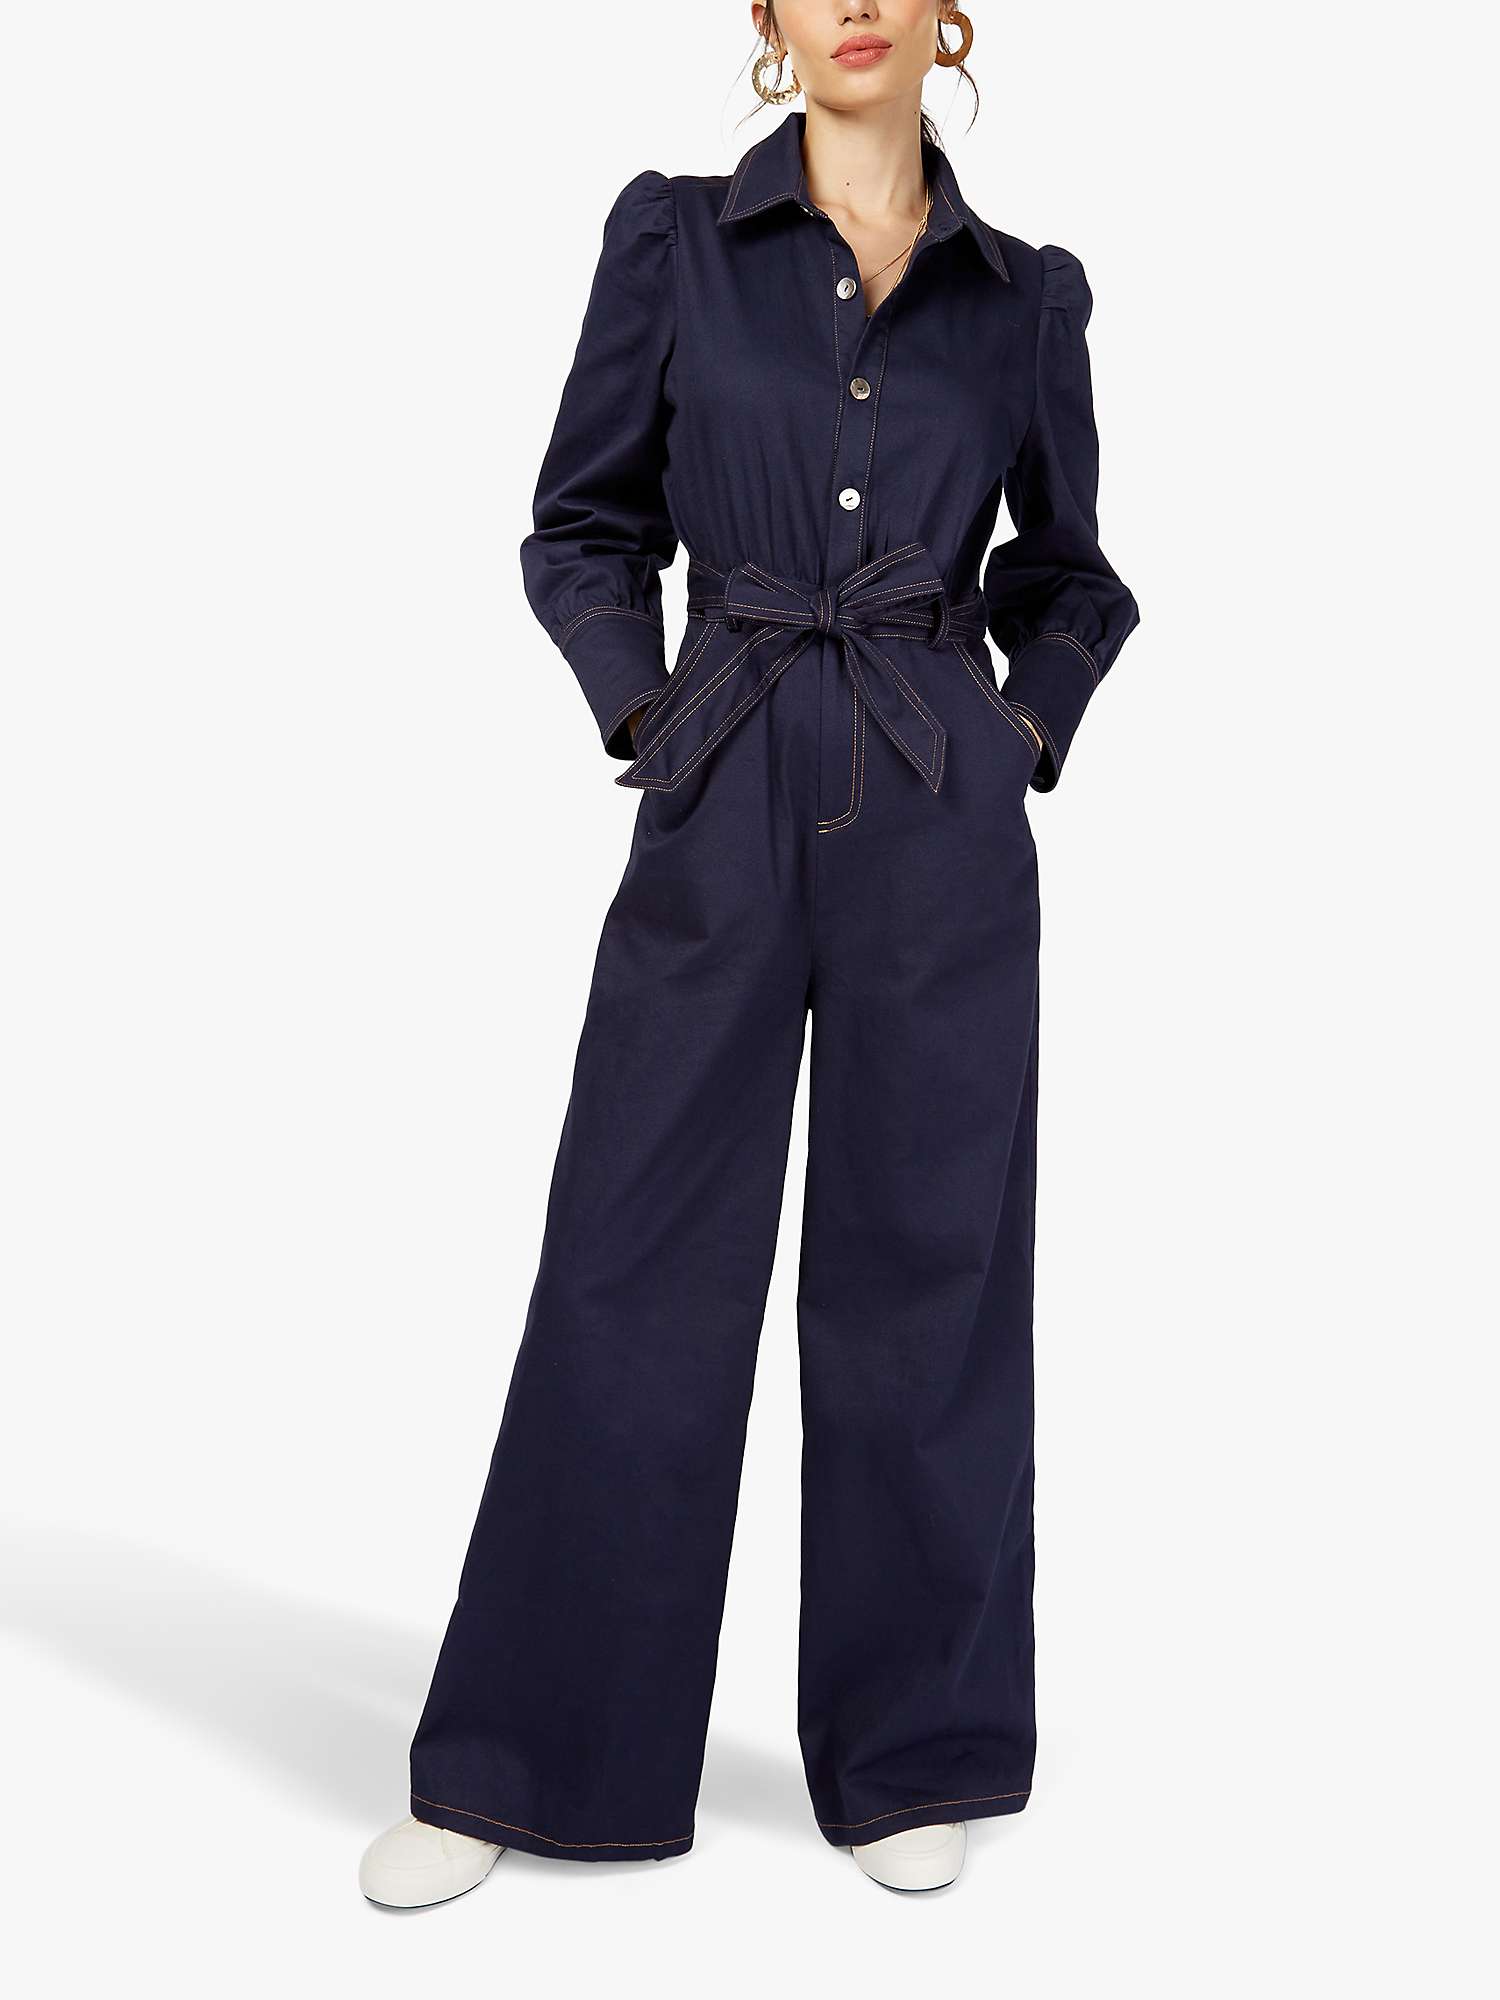 Somerset by Alice Temperley Utility Jumpsuit, Navy at John Lewis & Partners